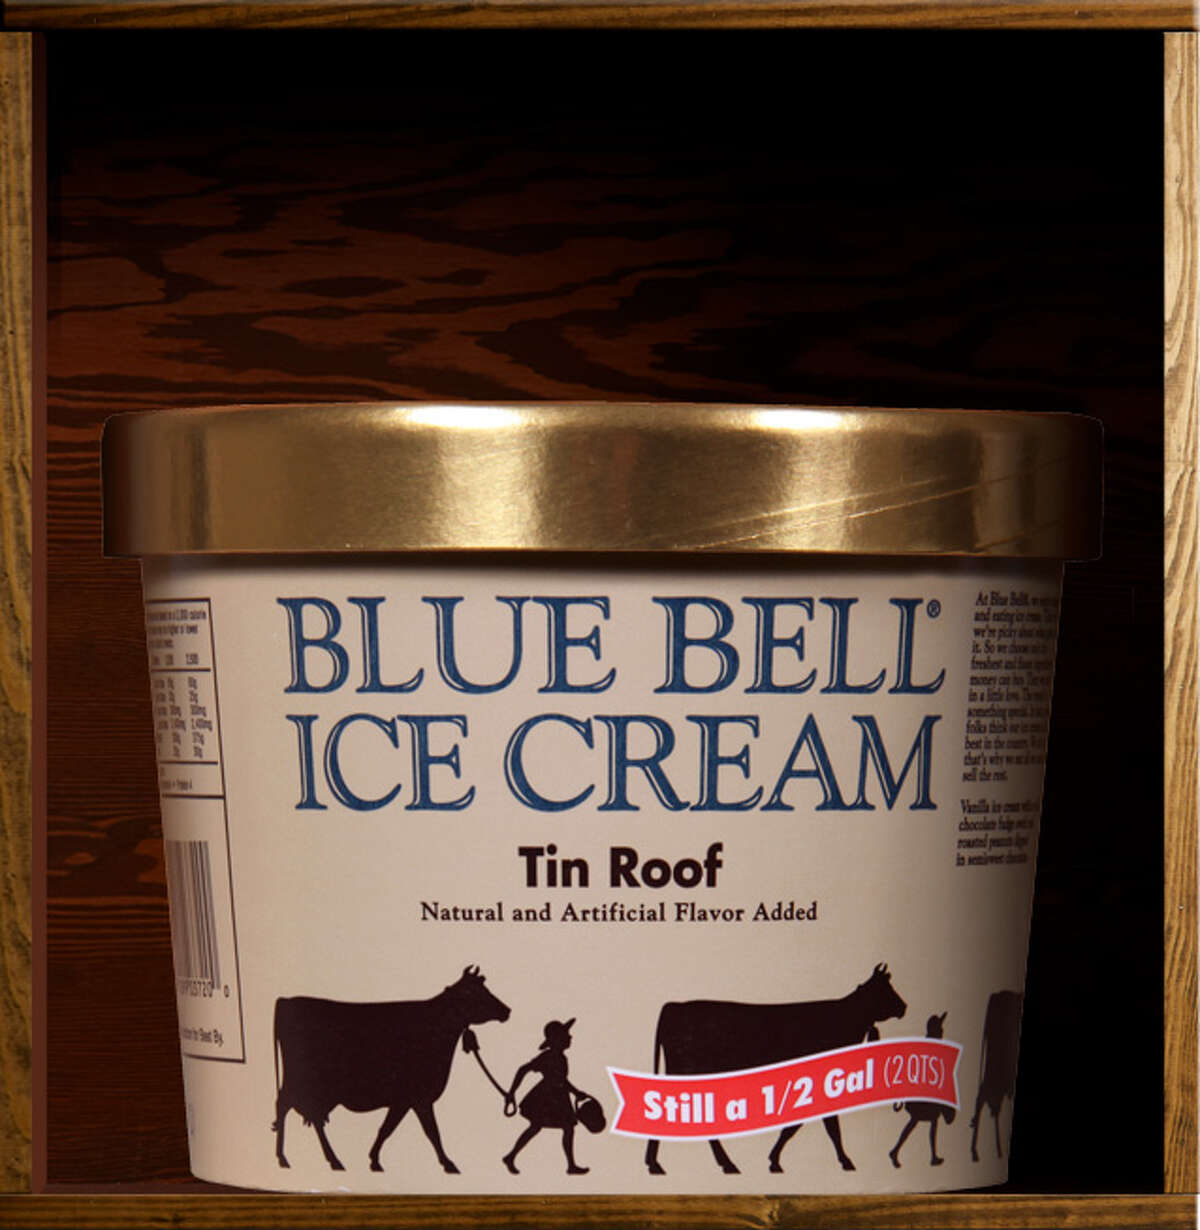 San Antonians Viral Blue Bell Ice Cream Licking Video Continues To Draw Social Media Reaction 